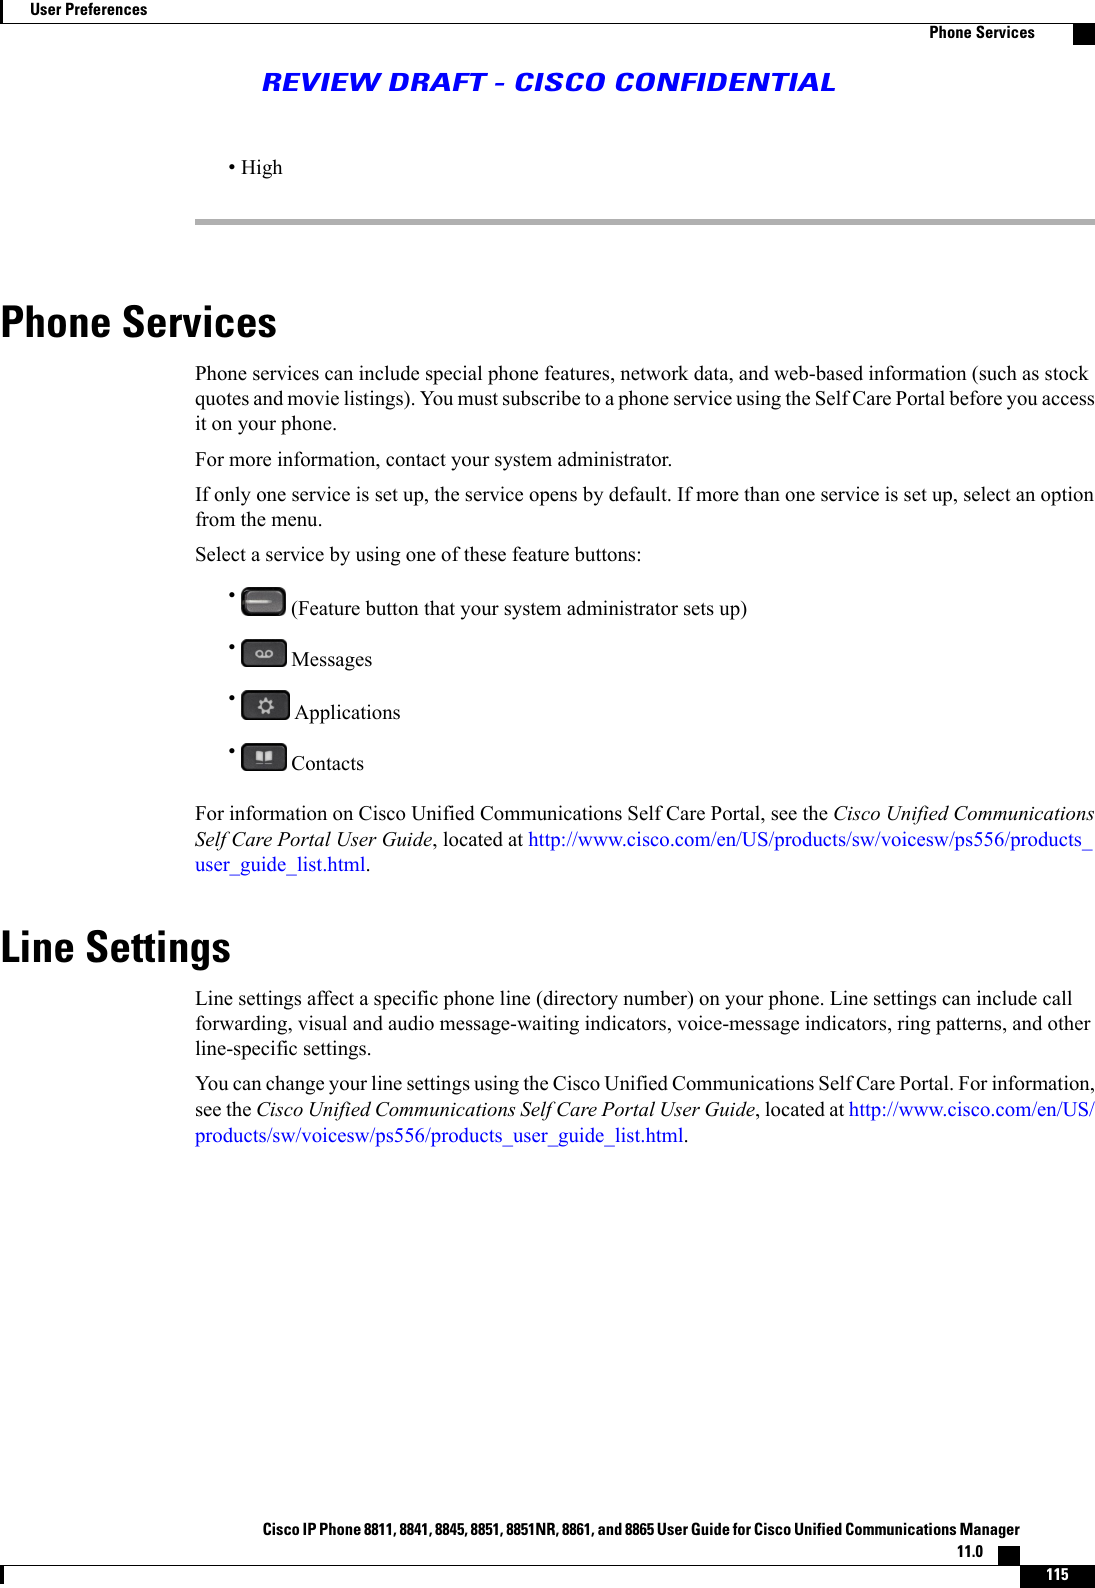 •HighPhone ServicesPhone services can include special phone features, network data, and web-based information (such as stockquotes and movie listings). You must subscribe to a phone service using the Self Care Portal before you accessit on your phone.For more information, contact your system administrator.If only one service is set up, the service opens by default. If more than one service is set up, select an optionfrom the menu.Select a service by using one of these feature buttons:•(Feature button that your system administrator sets up)•Messages•Applications•ContactsFor information on Cisco Unified Communications Self Care Portal, see the Cisco Unified CommunicationsSelf Care Portal User Guide, located at http://www.cisco.com/en/US/products/sw/voicesw/ps556/products_user_guide_list.html.Line SettingsLine settings affect a specific phone line (directory number) on your phone. Line settings can include callforwarding, visual and audio message-waiting indicators, voice-message indicators, ring patterns, and otherline-specific settings.You can change your line settings using the Cisco Unified Communications Self Care Portal. For information,see the Cisco Unified Communications Self Care Portal User Guide, located at http://www.cisco.com/en/US/products/sw/voicesw/ps556/products_user_guide_list.html.Cisco IP Phone 8811, 8841, 8845, 8851, 8851NR, 8861, and 8865 User Guide for Cisco Unified Communications Manager11.0    115User PreferencesPhone ServicesREVIEW DRAFT - CISCO CONFIDENTIAL